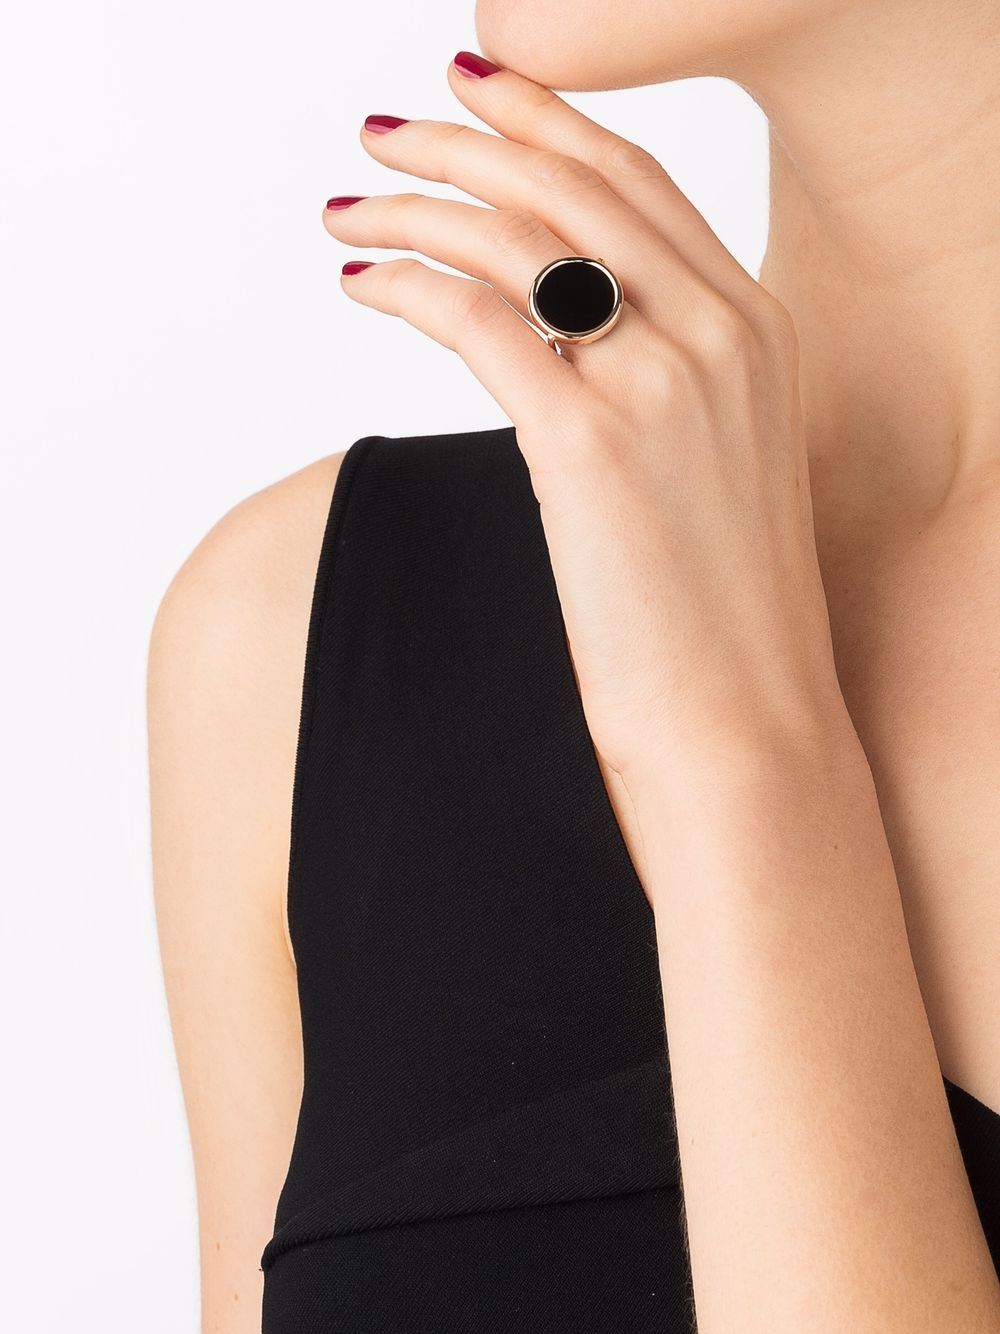 Shop Ginette Ny 18kt Rose Gold Onyx Disc Ring In 粉色